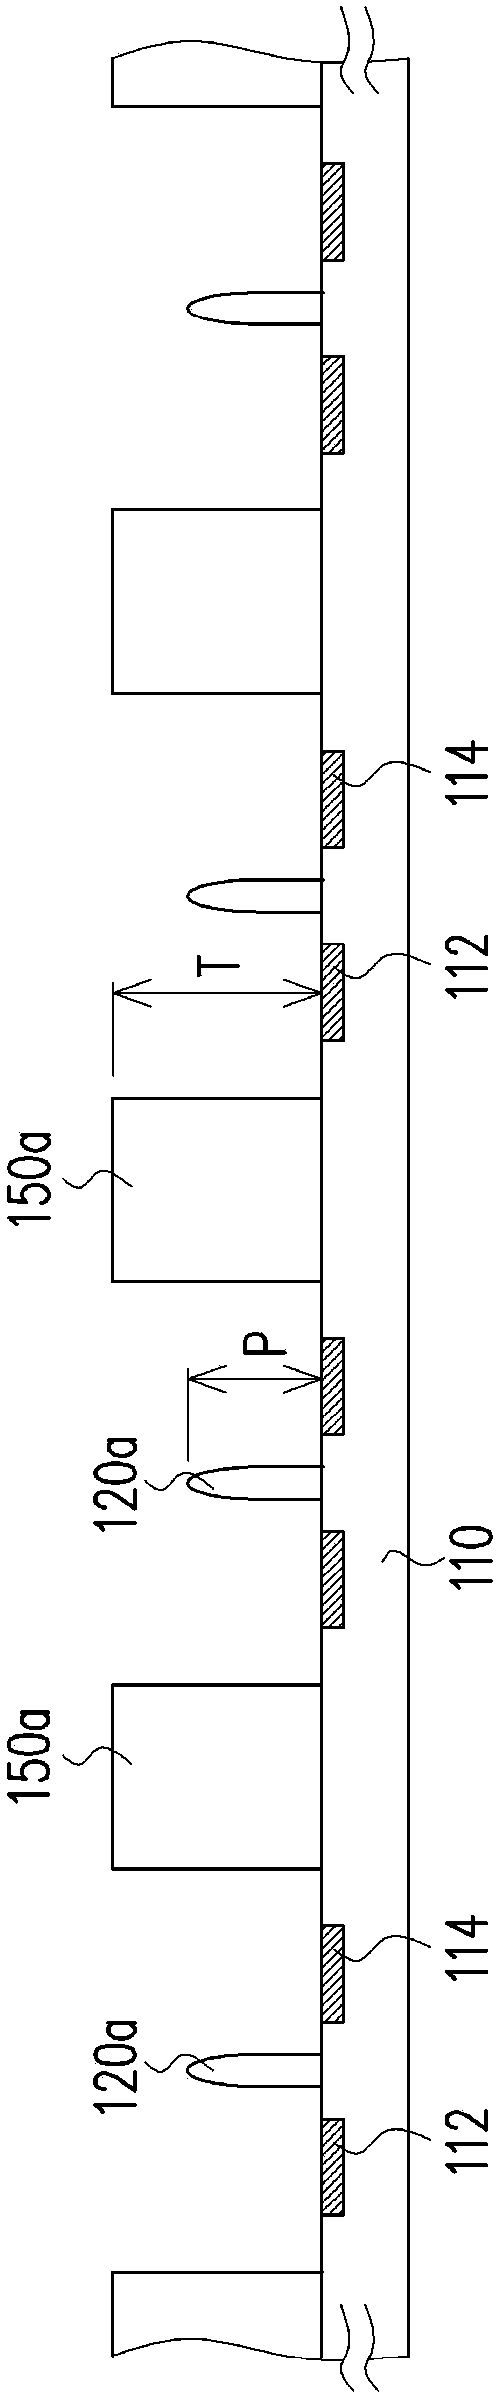 Light emitting diode display device and manufacturing method thereof